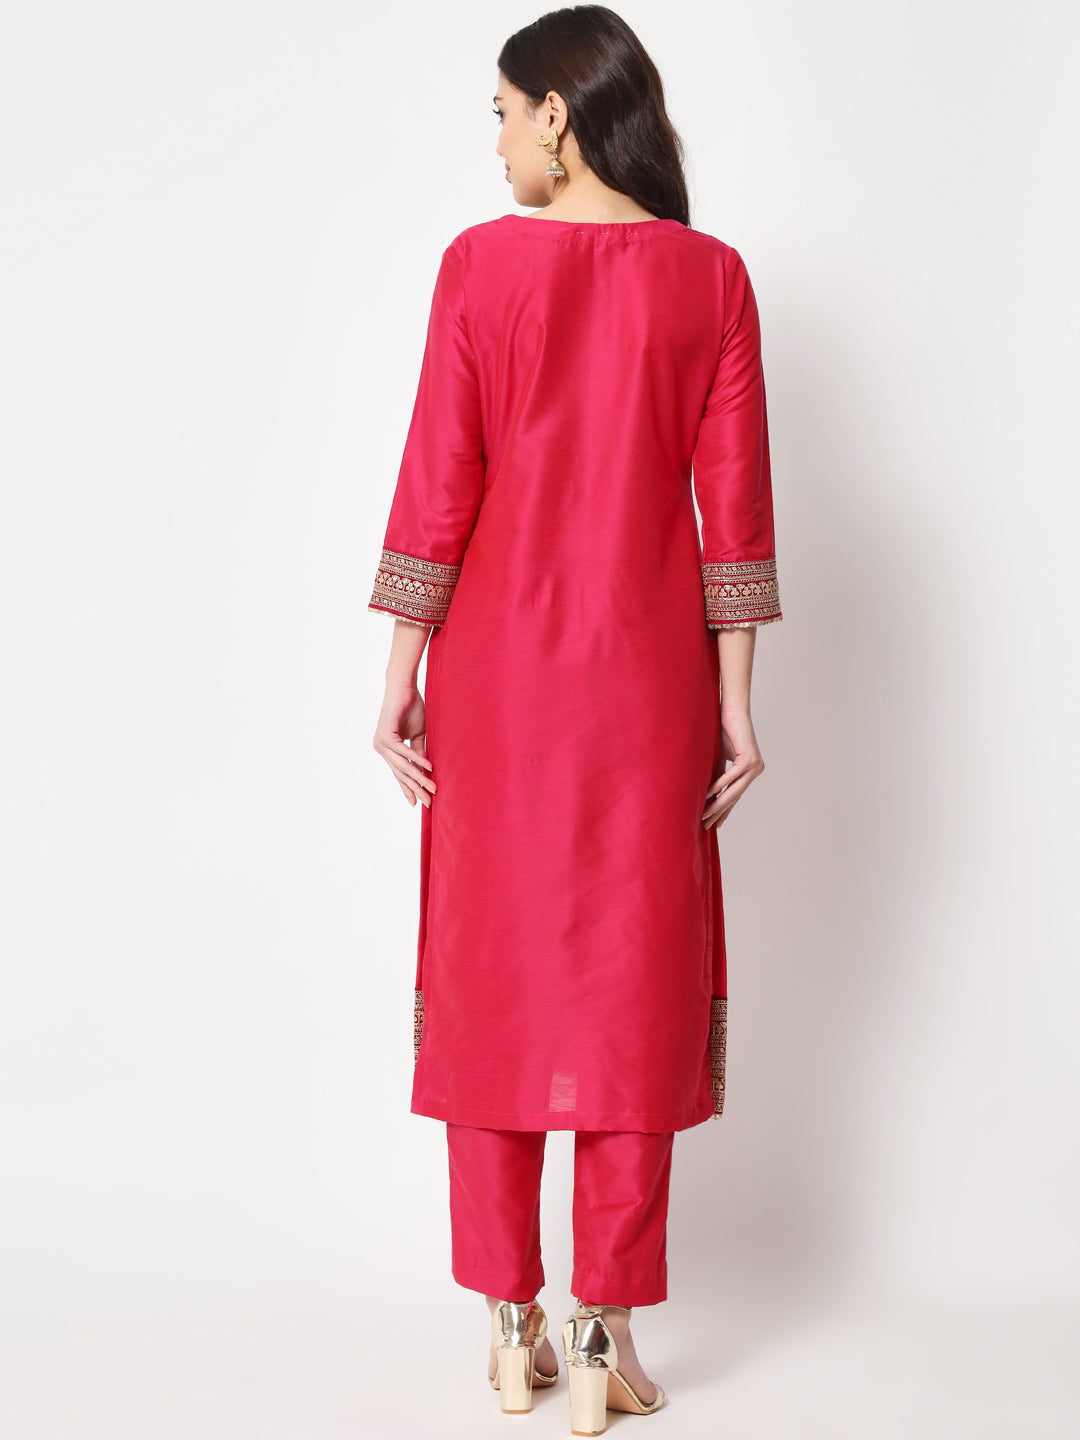 Women's Traditional Bridal Pink Embroidered Straight Kurti With Pants - Anokherang